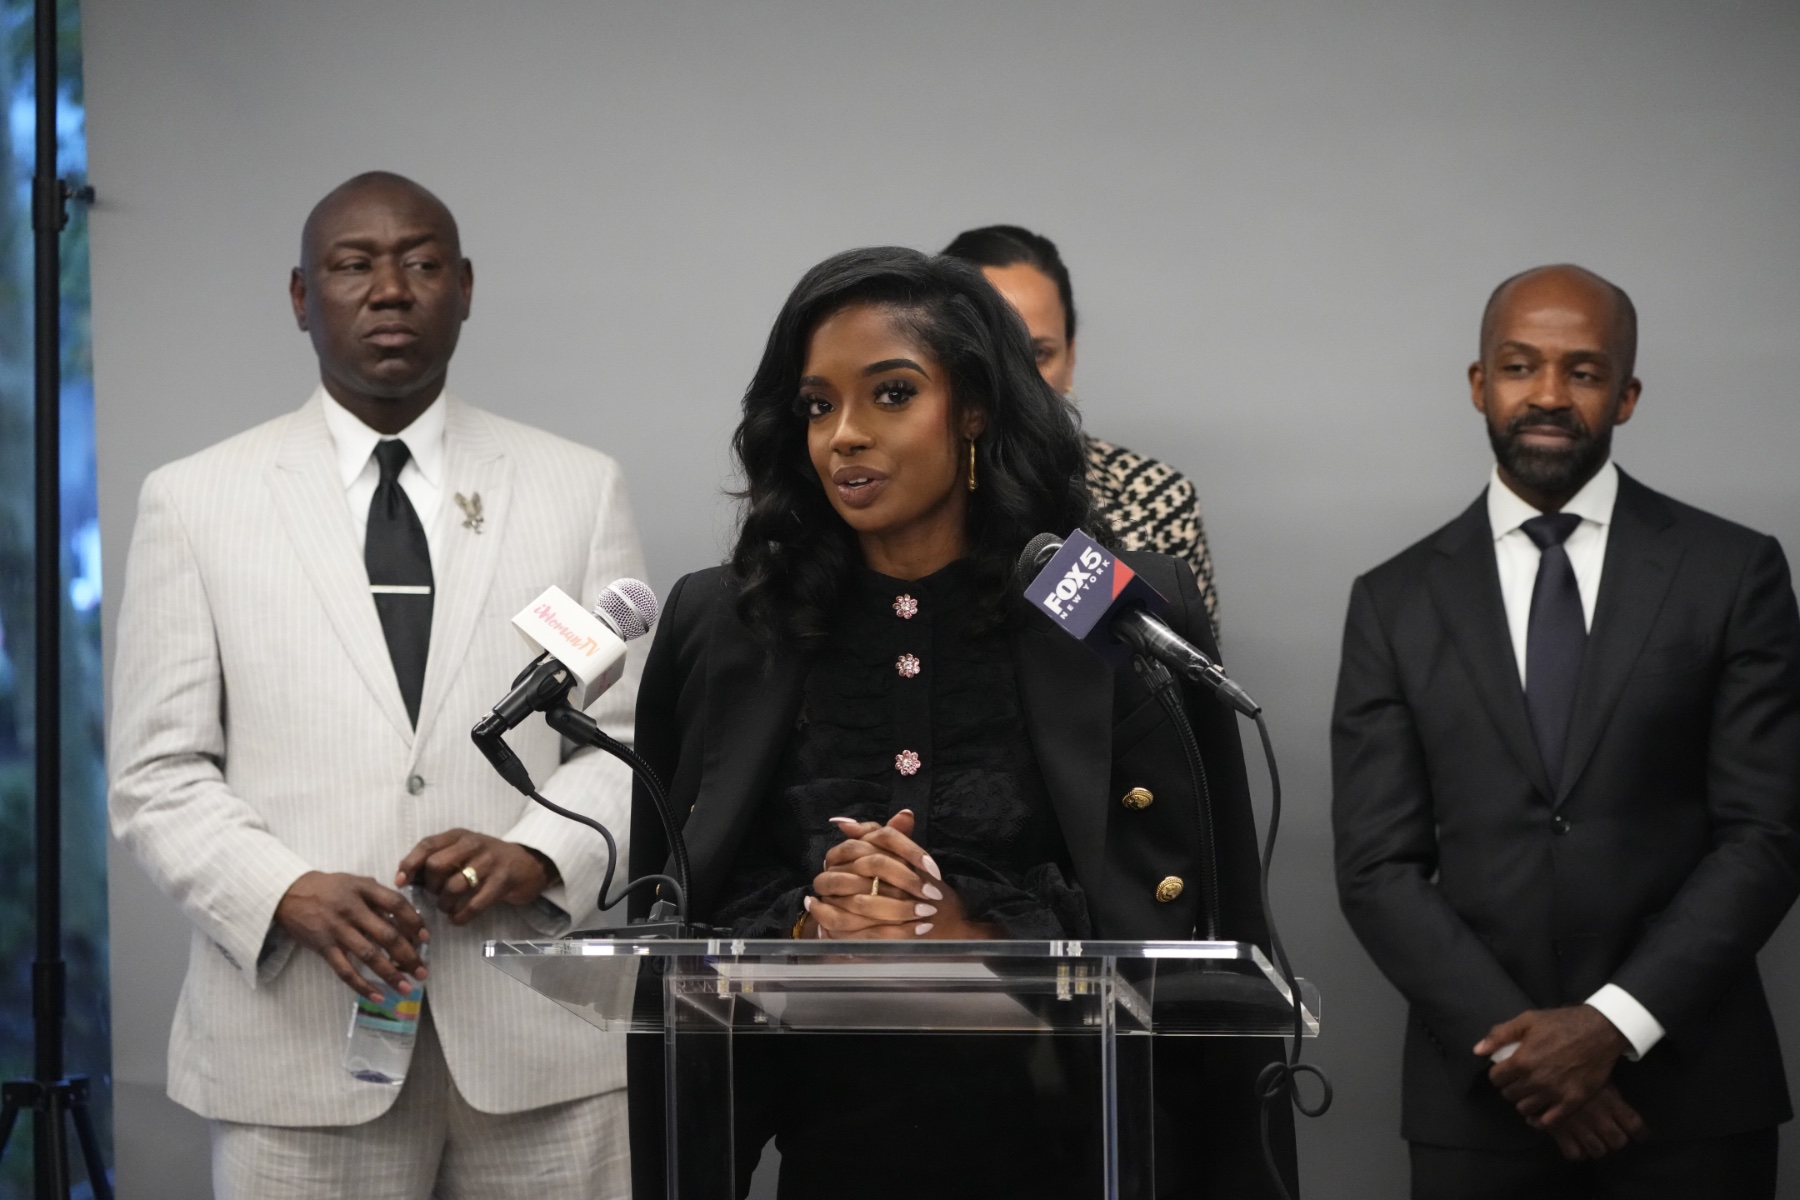 Arian Simone speaks at a news conference, with attorneys Ben Crump and Alphonso David.